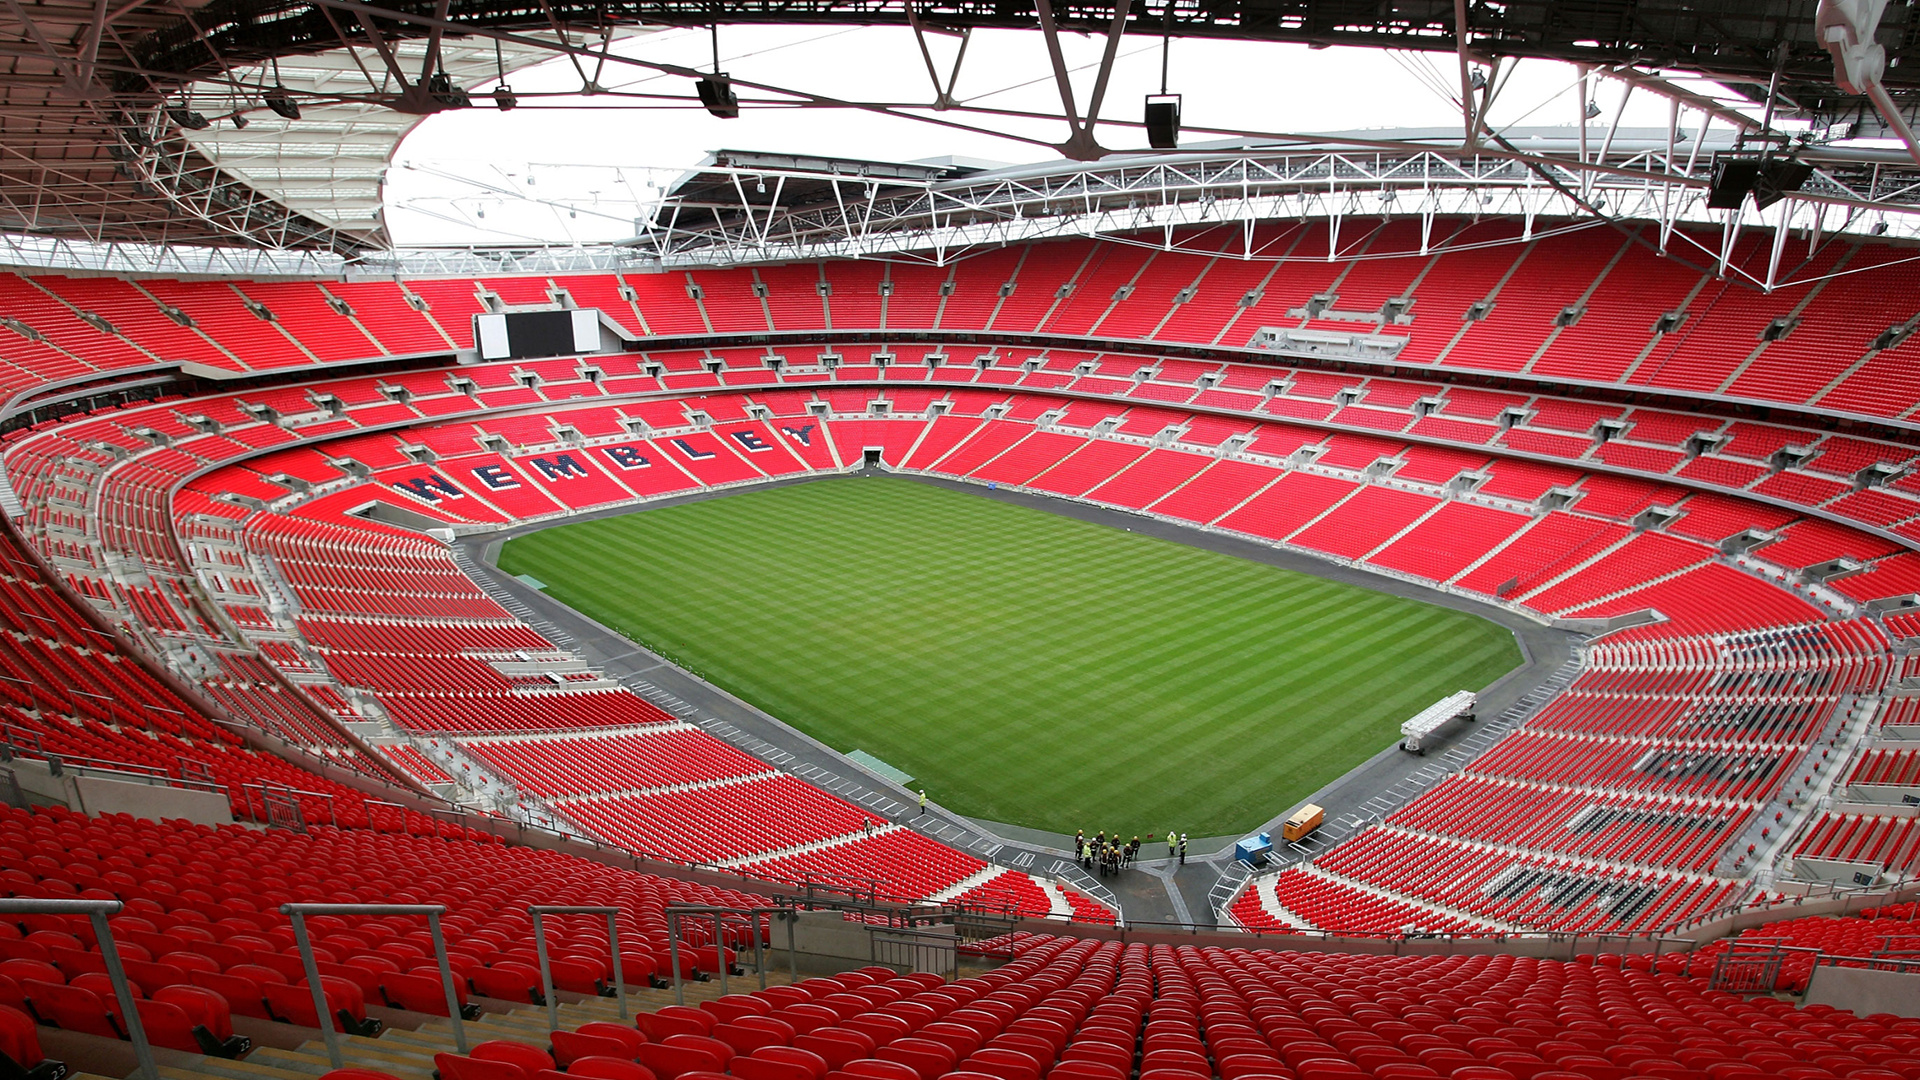 Wembley Stadium: A bowl design with a capacity of 90,000, protected from the elements by a sliding roof. 1920x1080 Full HD Background.